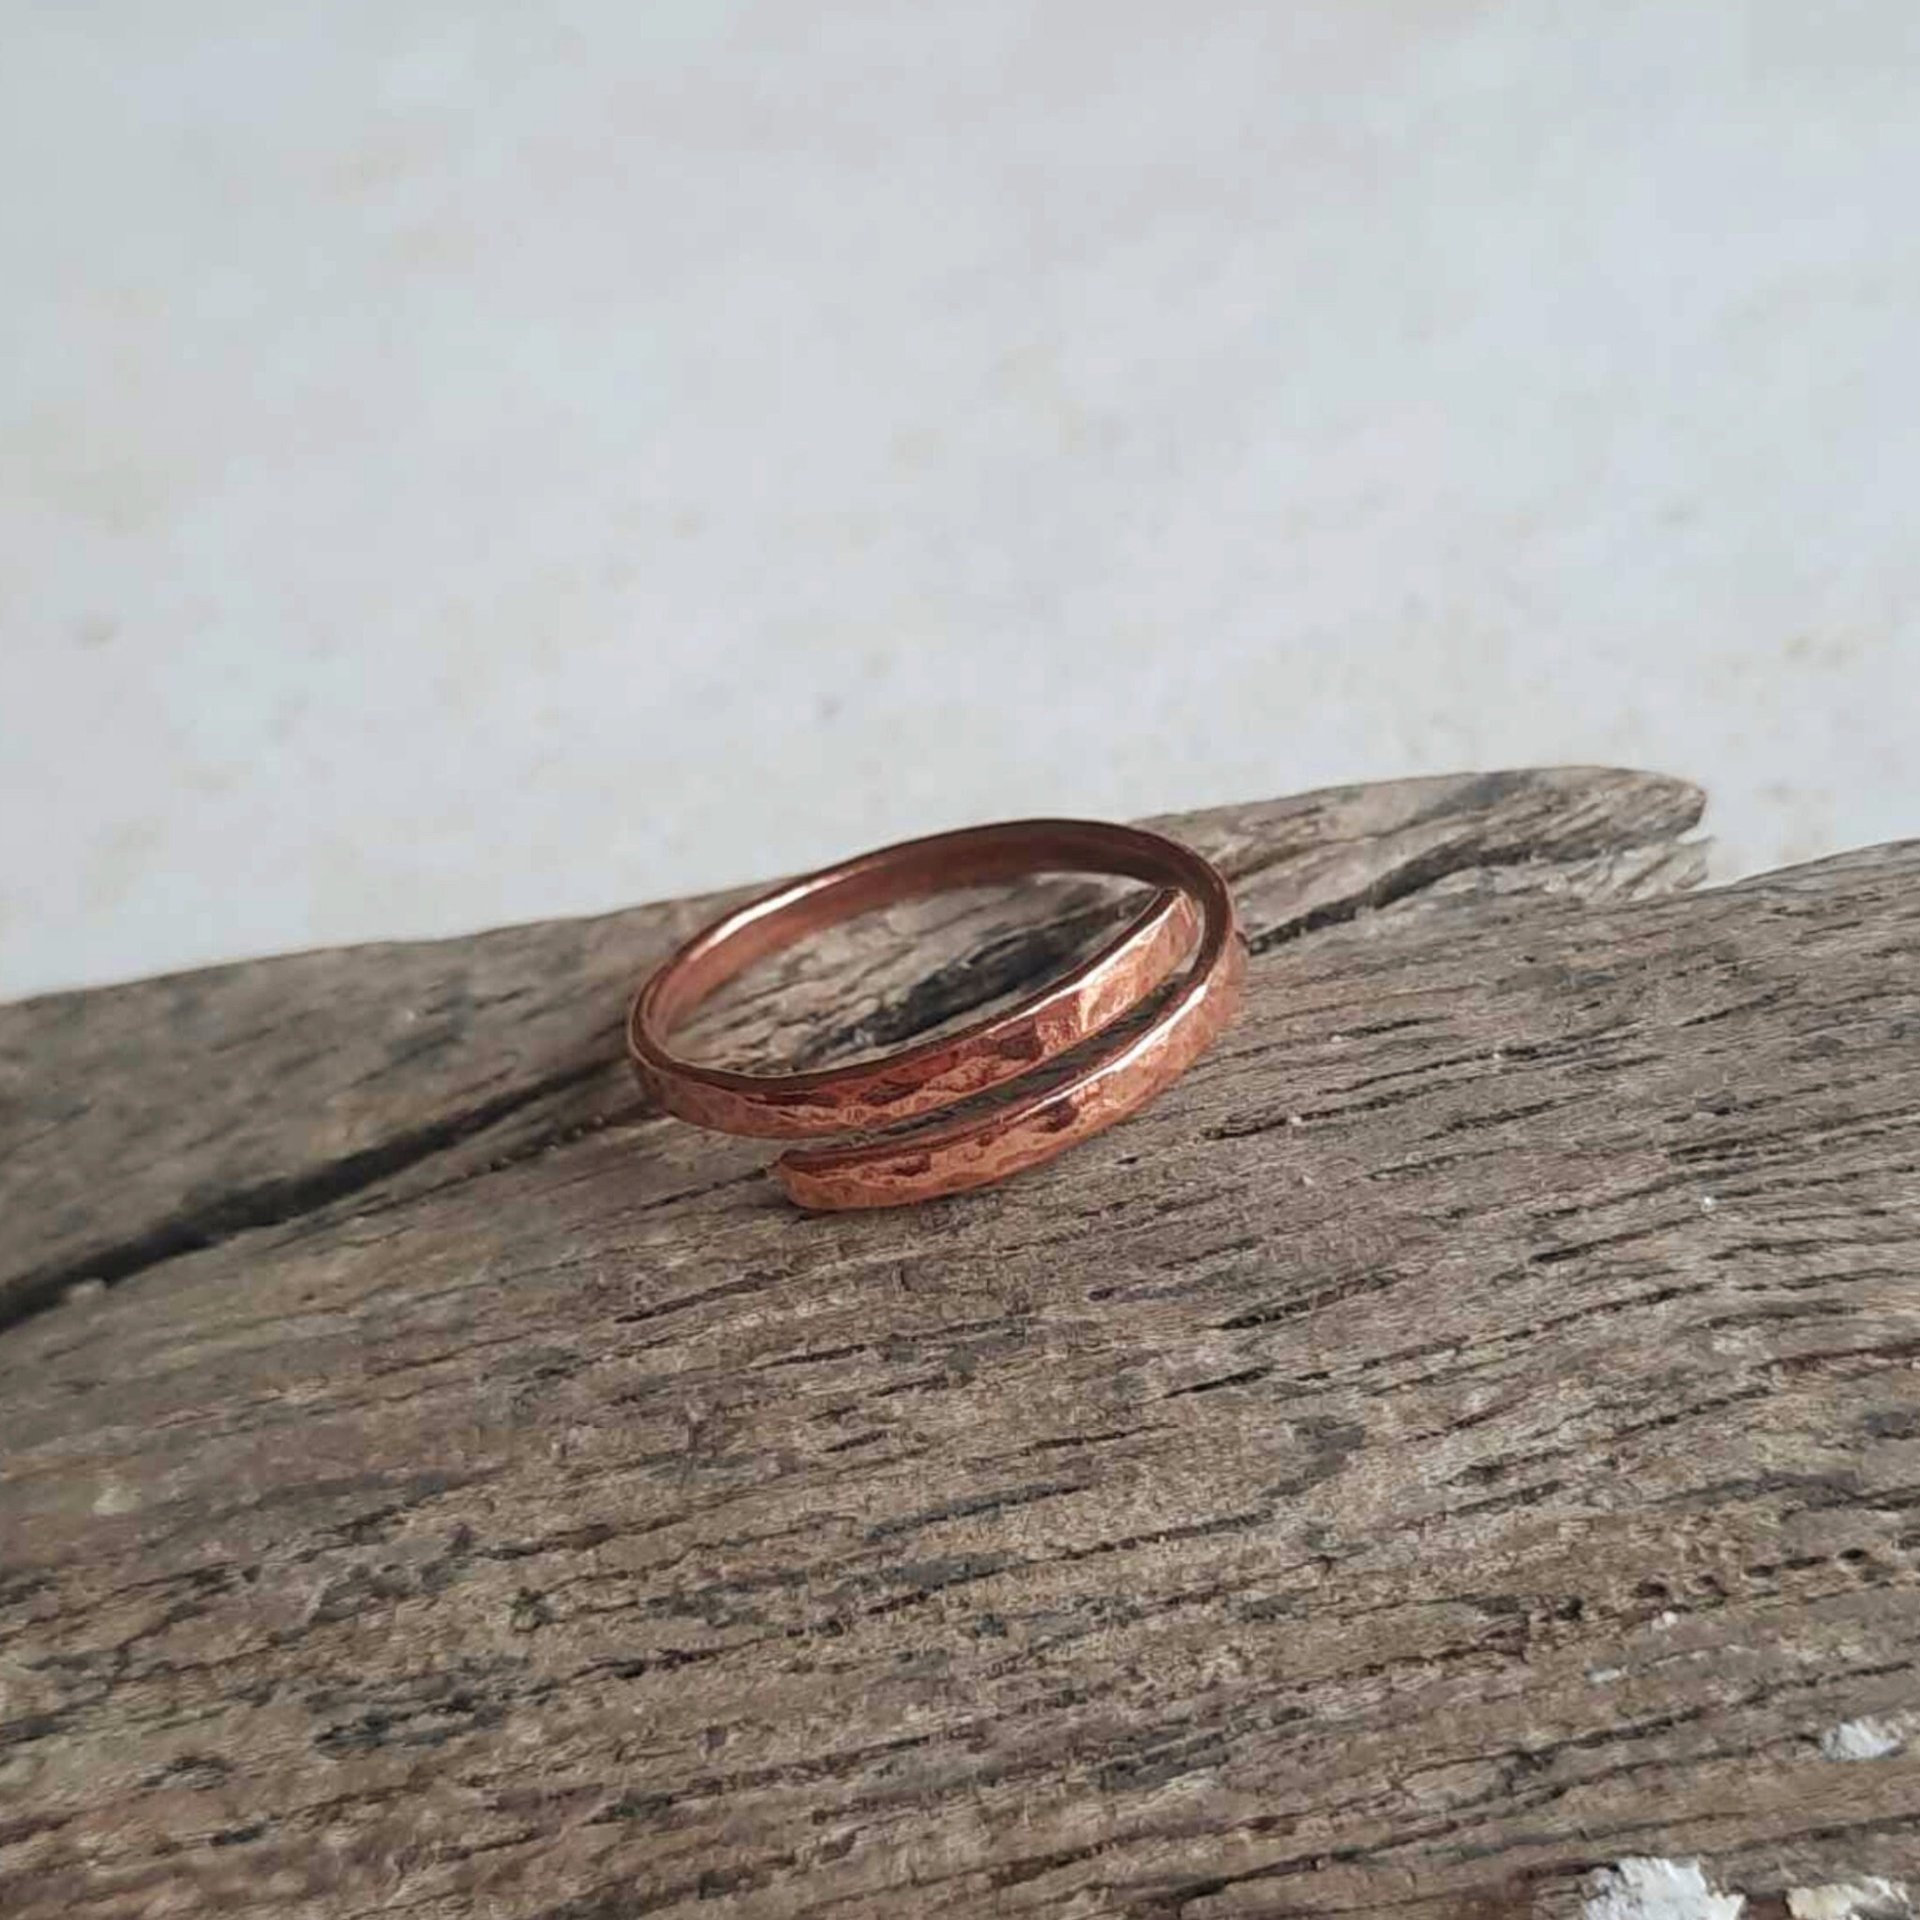 Hammered rustic copper ring, 7th anniversary gift idea, hand forged by The Tiny Tree Frog Jewellery